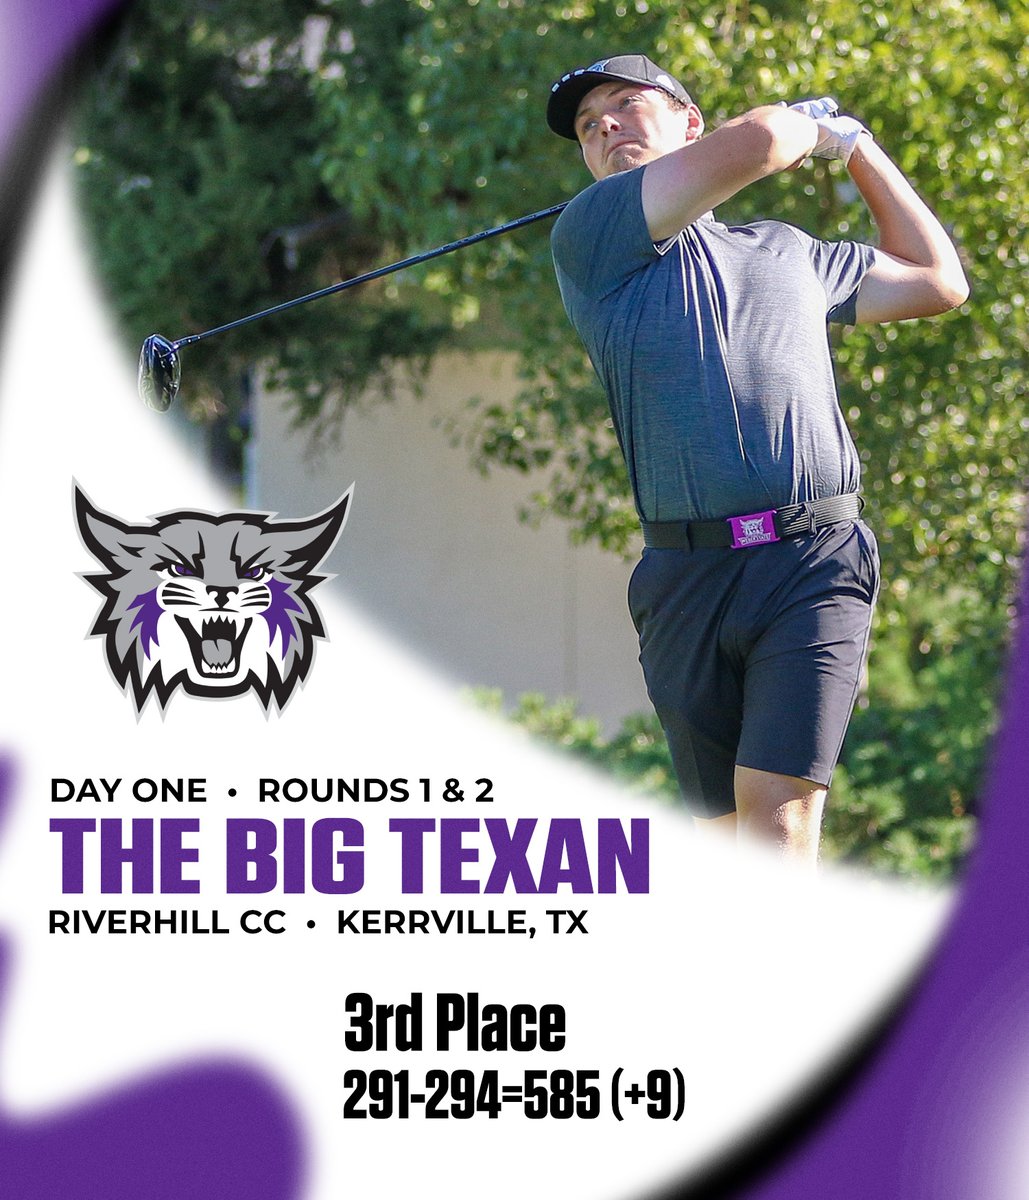 Two good rounds for the Wildcats today at The Big Texan and the team is in third place thru 36 holes. Isaac Buerger with consecutive 71's and is in a team-best tie for 4th place overall. Final round is on Tuesday. Live scoring is available at Golfstat.com.